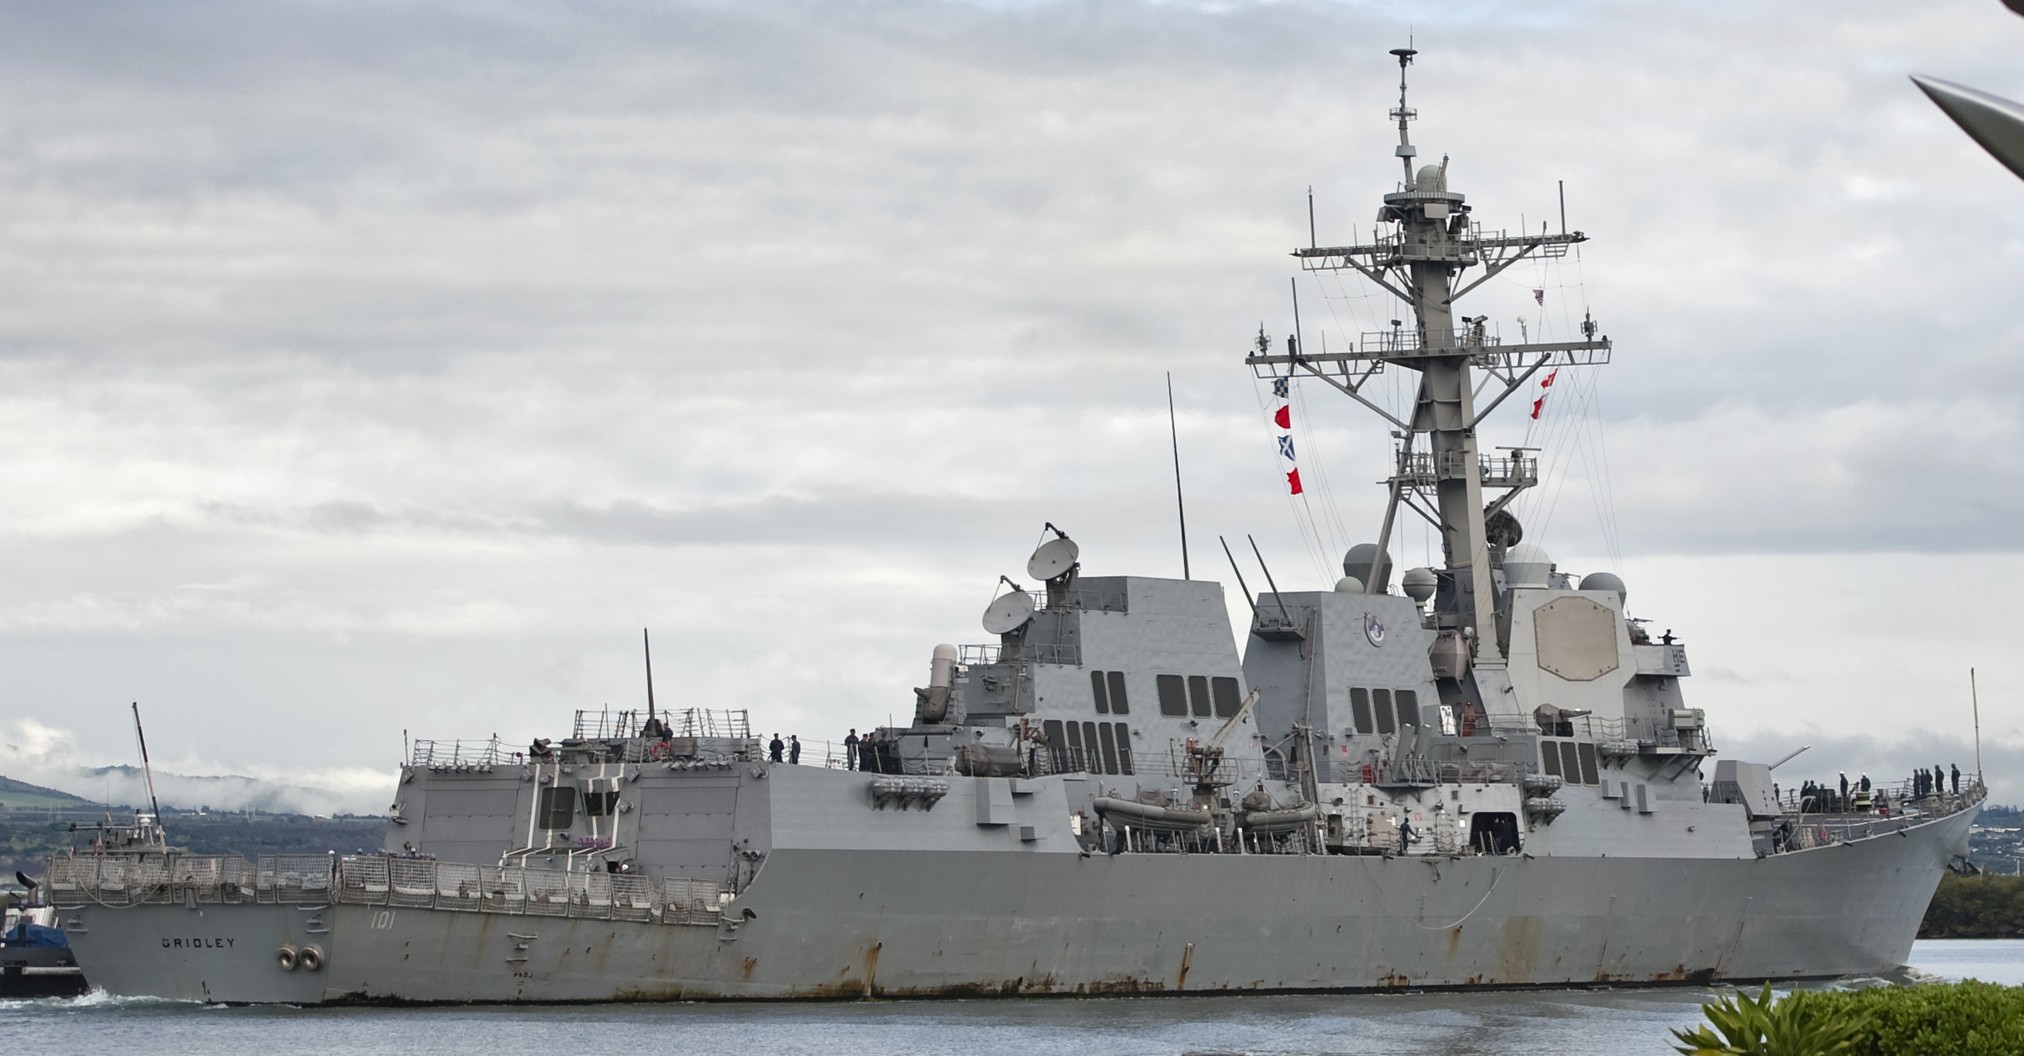 ddg-101 uss gridley arleigh burke class guided missile destroyer aegis us navy joint base pearl harbor hickam hawaii 49